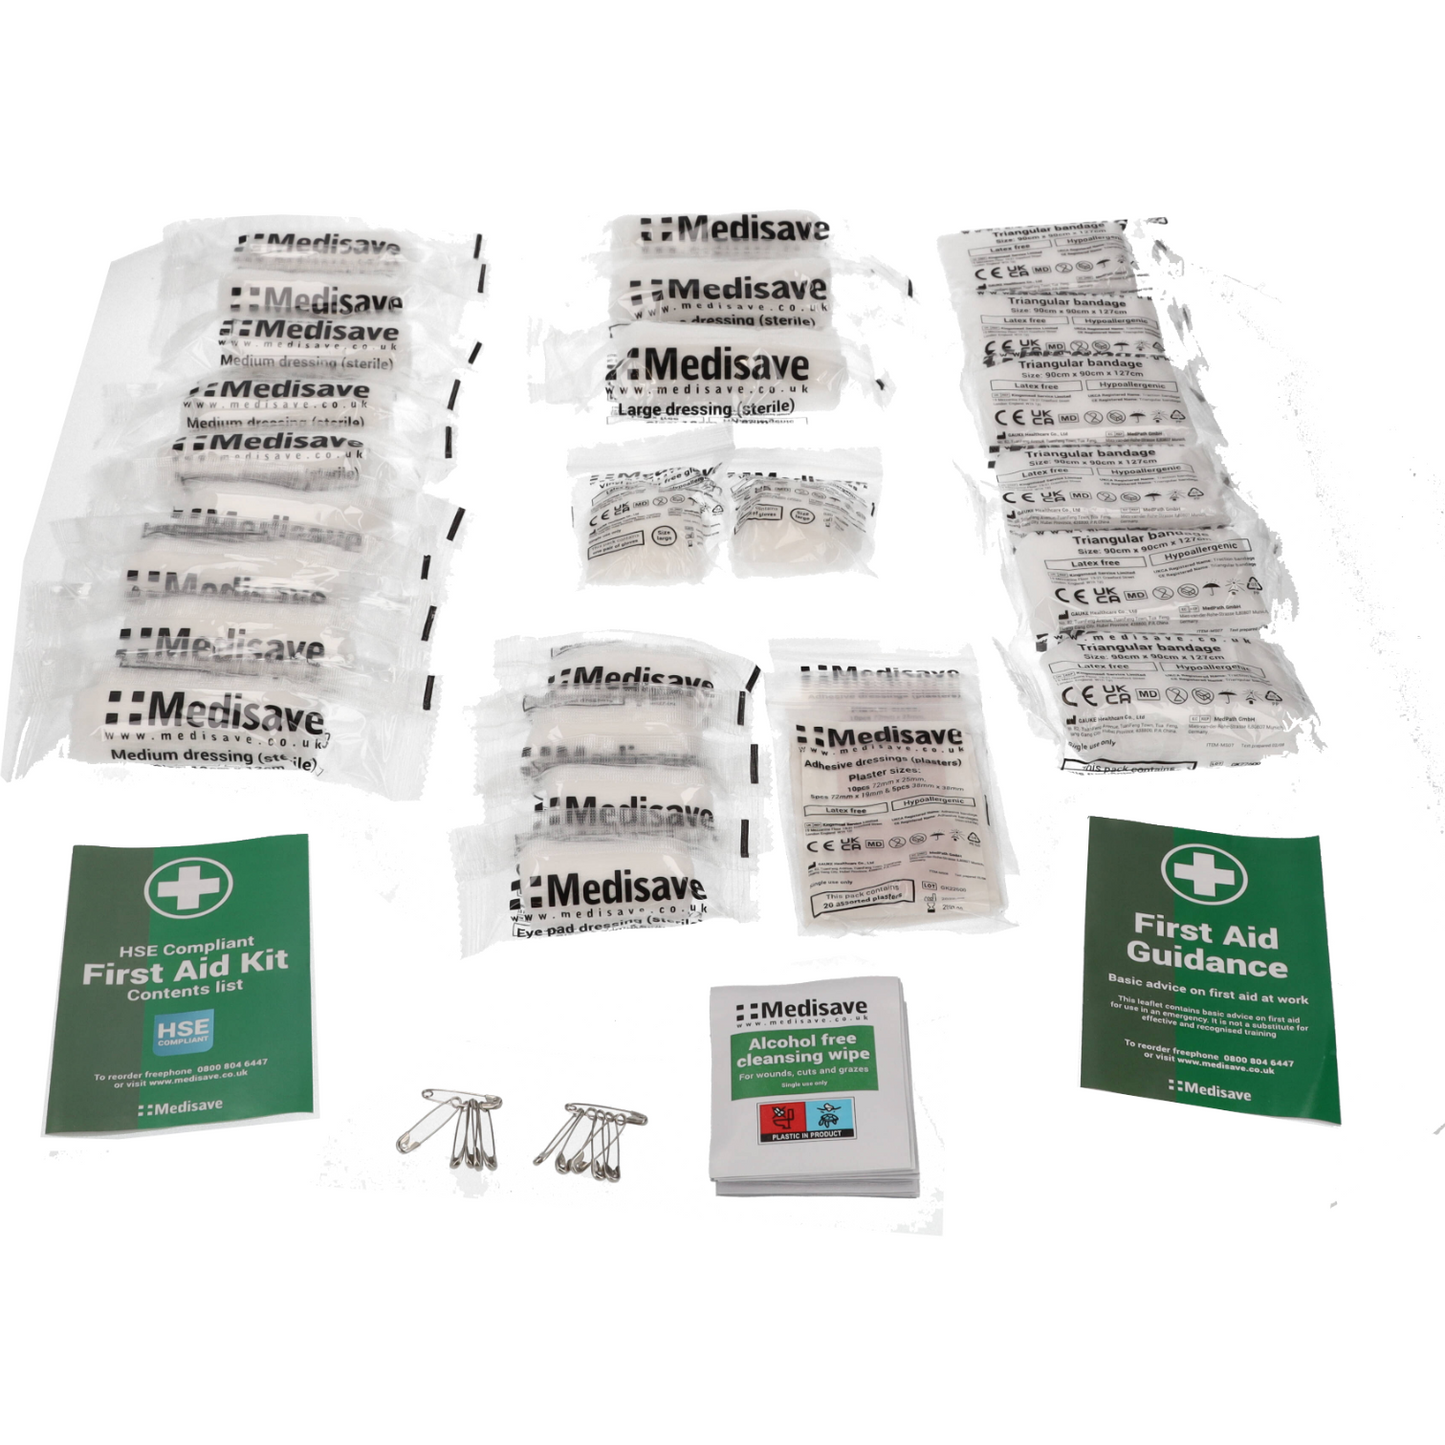 HSE Compliant Workplace First Aid Kit - 10 Person Refill